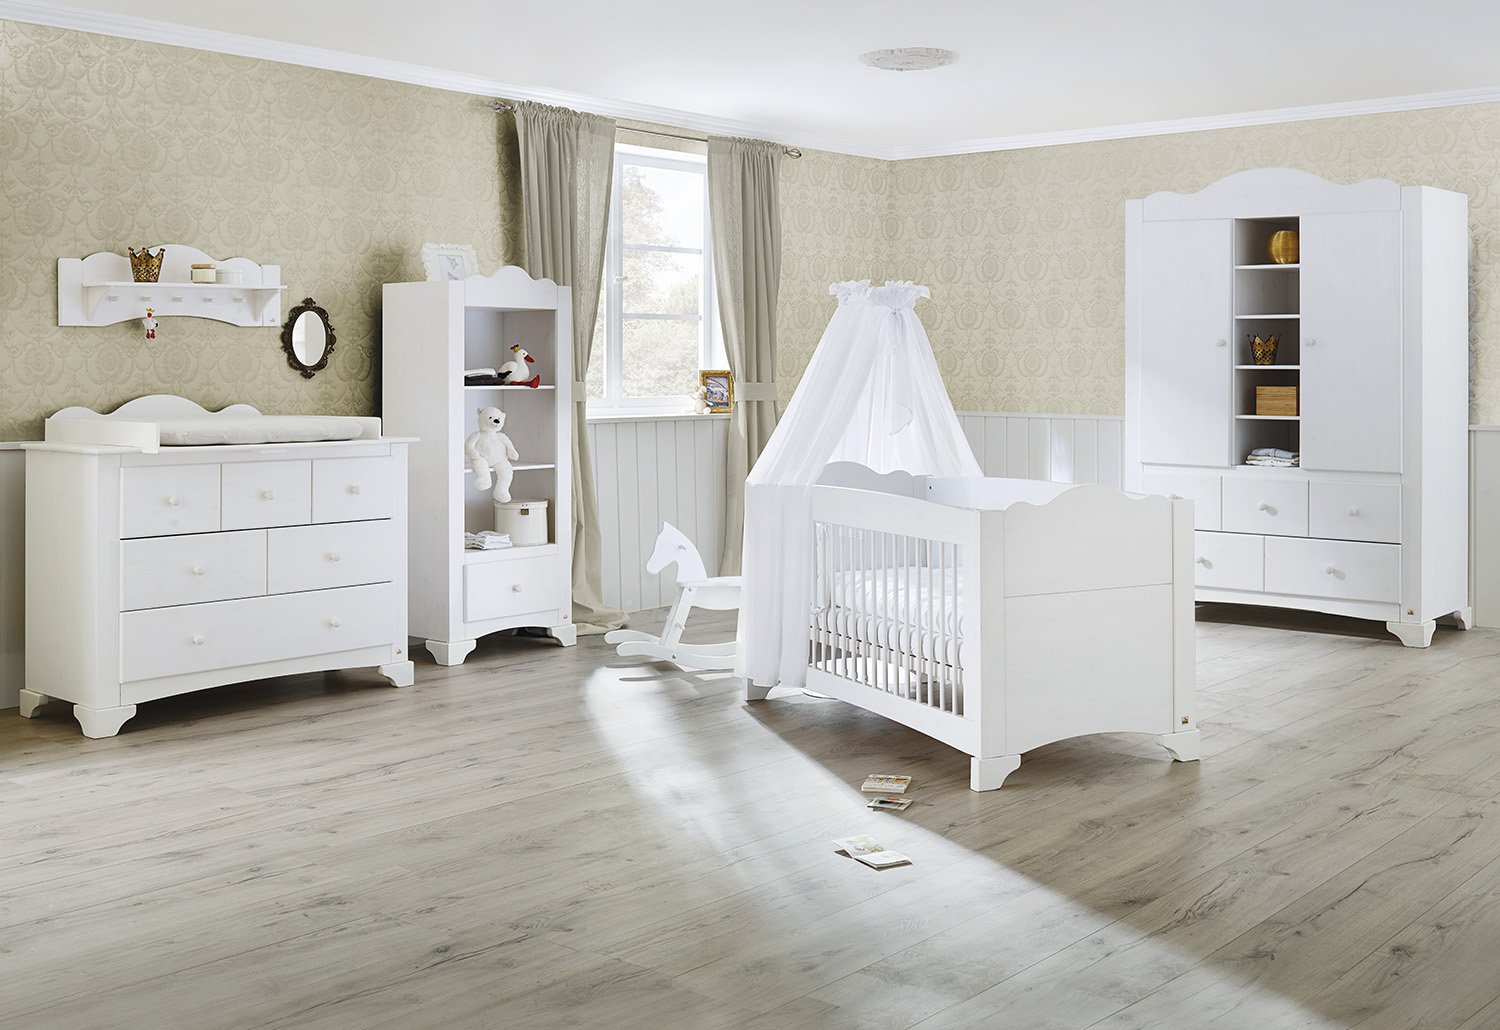 Pinolino Pino Baby Room Furniture Set Wide Large with Cot Bed Large Wardrobe and Changing Table White